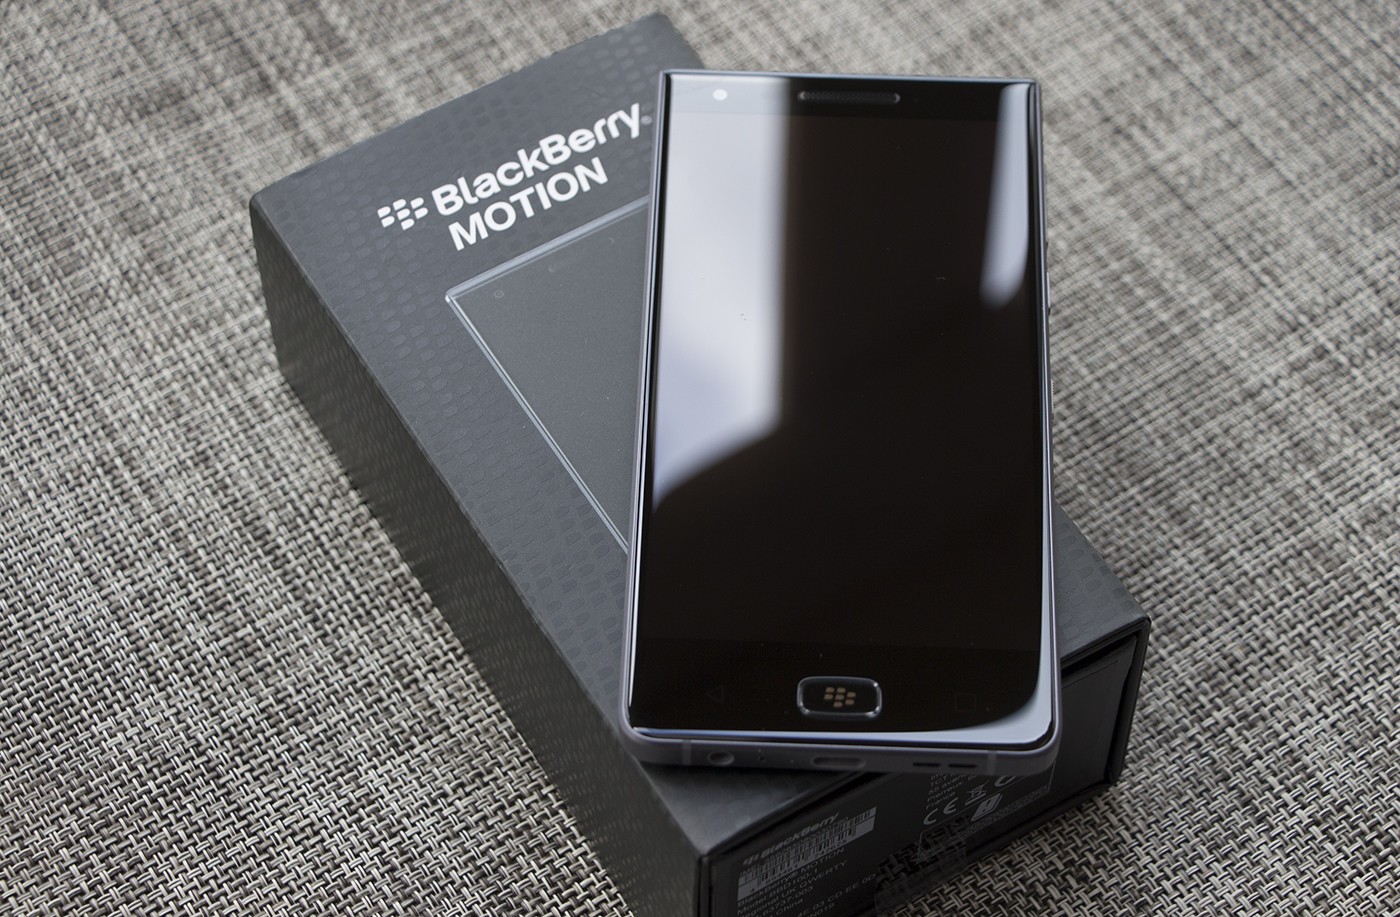 Read more about the article Blackberry Motion All Touch Secure Smartphone